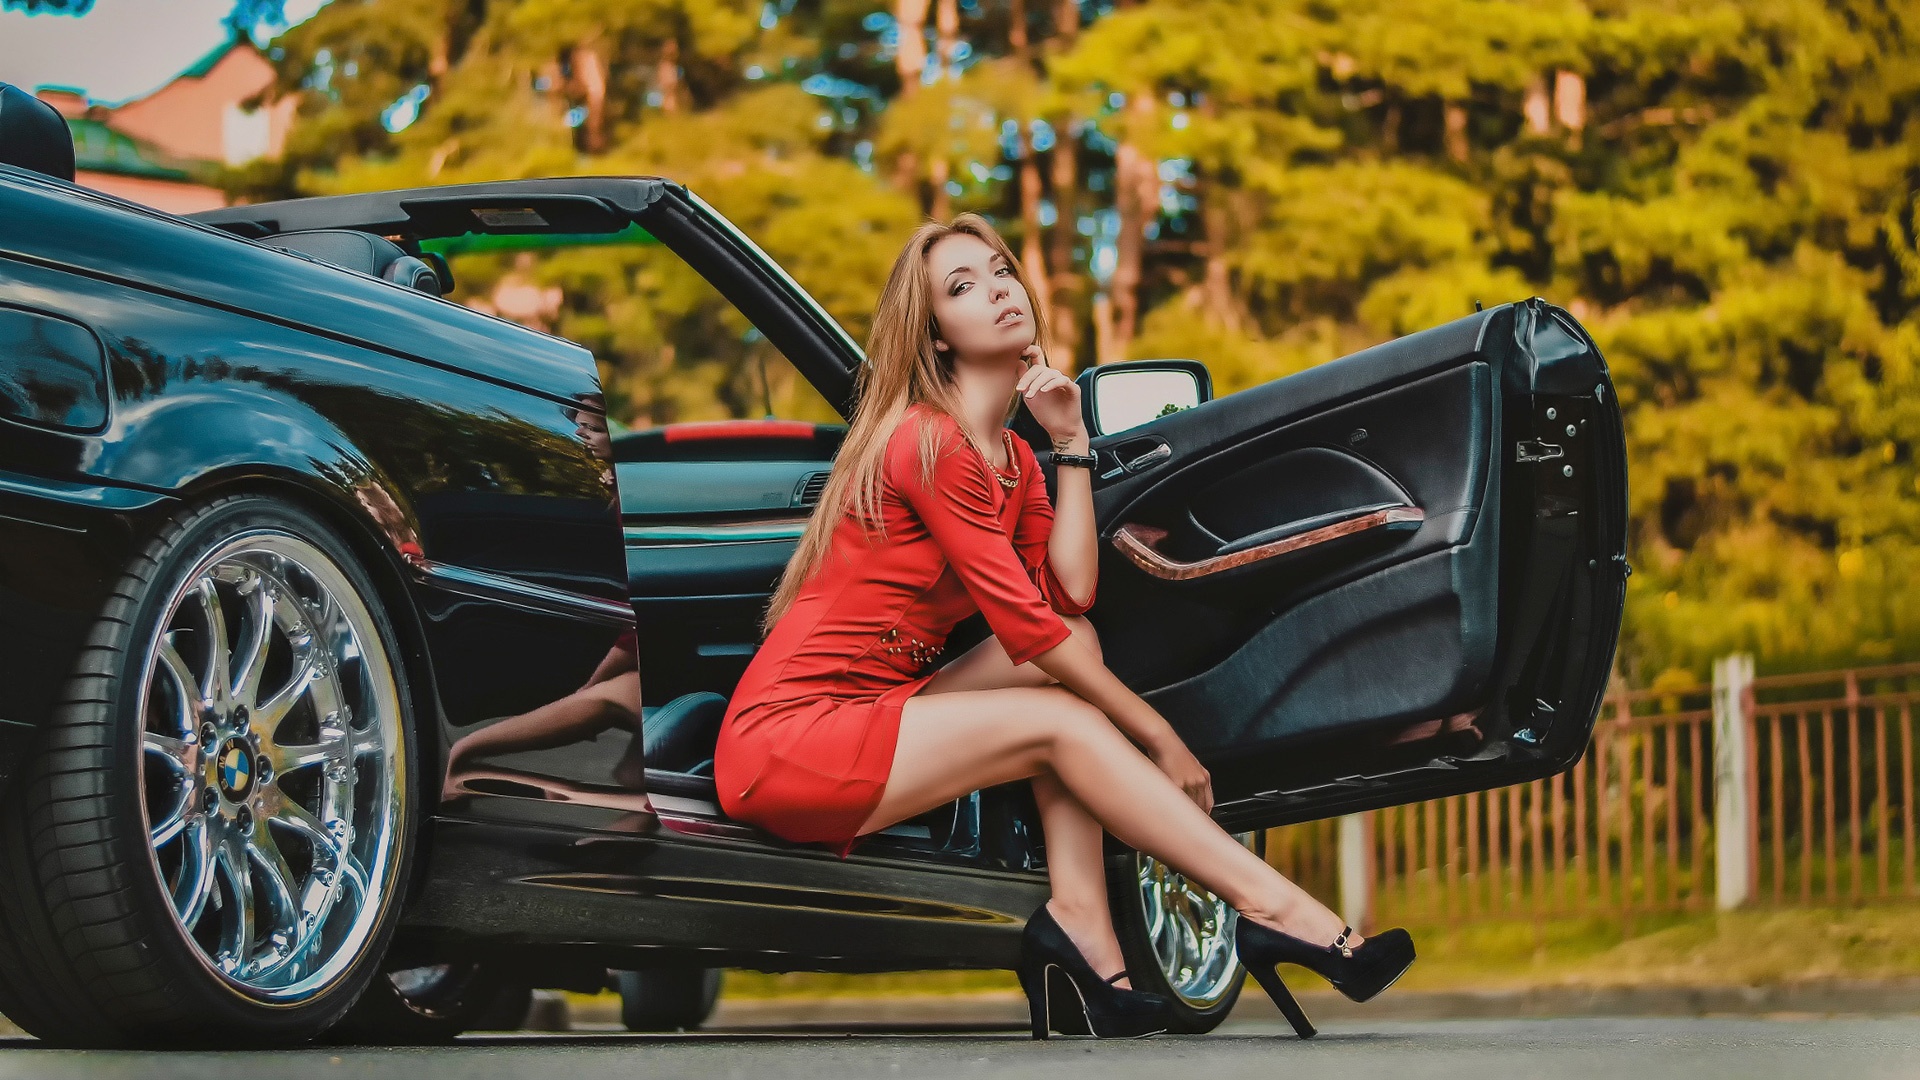 Hot Blonde And Bmw Series Convertible Sexy Legs And Fast Cars Hd